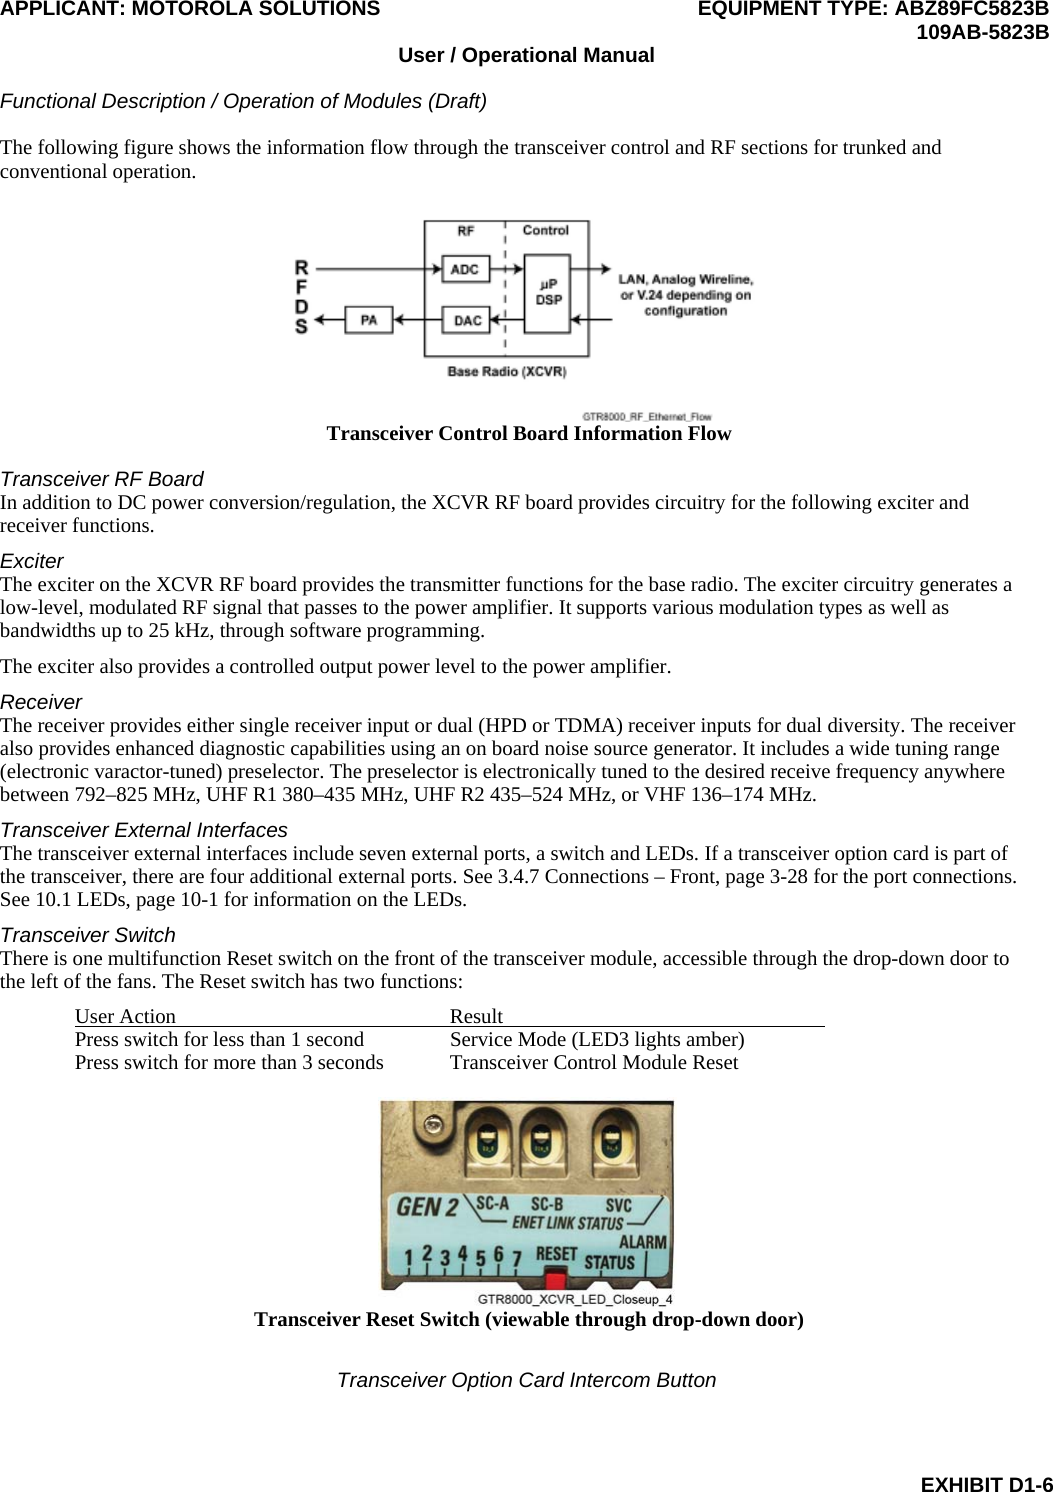 APPLICANT: MOTOROLA SOLUTIONS EQUIPMENT TYPE: ABZ89FC5823B  109AB-5823B User / Operational Manual  Functional Description / Operation of Modules (Draft)  EXHIBIT D1-6 The following figure shows the information flow through the transceiver control and RF sections for trunked and conventional operation.  Transceiver Control Board Information Flow  Transceiver RF Board In addition to DC power conversion/regulation, the XCVR RF board provides circuitry for the following exciter and receiver functions. Exciter The exciter on the XCVR RF board provides the transmitter functions for the base radio. The exciter circuitry generates a low-level, modulated RF signal that passes to the power amplifier. It supports various modulation types as well as bandwidths up to 25 kHz, through software programming. The exciter also provides a controlled output power level to the power amplifier. Receiver The receiver provides either single receiver input or dual (HPD or TDMA) receiver inputs for dual diversity. The receiver also provides enhanced diagnostic capabilities using an on board noise source generator. It includes a wide tuning range (electronic varactor-tuned) preselector. The preselector is electronically tuned to the desired receive frequency anywhere between 792–825 MHz, UHF R1 380–435 MHz, UHF R2 435–524 MHz, or VHF 136–174 MHz. Transceiver External Interfaces The transceiver external interfaces include seven external ports, a switch and LEDs. If a transceiver option card is part of the transceiver, there are four additional external ports. See 3.4.7 Connections – Front, page 3-28 for the port connections. See 10.1 LEDs, page 10-1 for information on the LEDs. Transceiver Switch There is one multifunction Reset switch on the front of the transceiver module, accessible through the drop-down door to the left of the fans. The Reset switch has two functions: User Action  Result   Press switch for less than 1 second  Service Mode (LED3 lights amber) Press switch for more than 3 seconds  Transceiver Control Module Reset   Transceiver Reset Switch (viewable through drop-down door)  Transceiver Option Card Intercom Button 